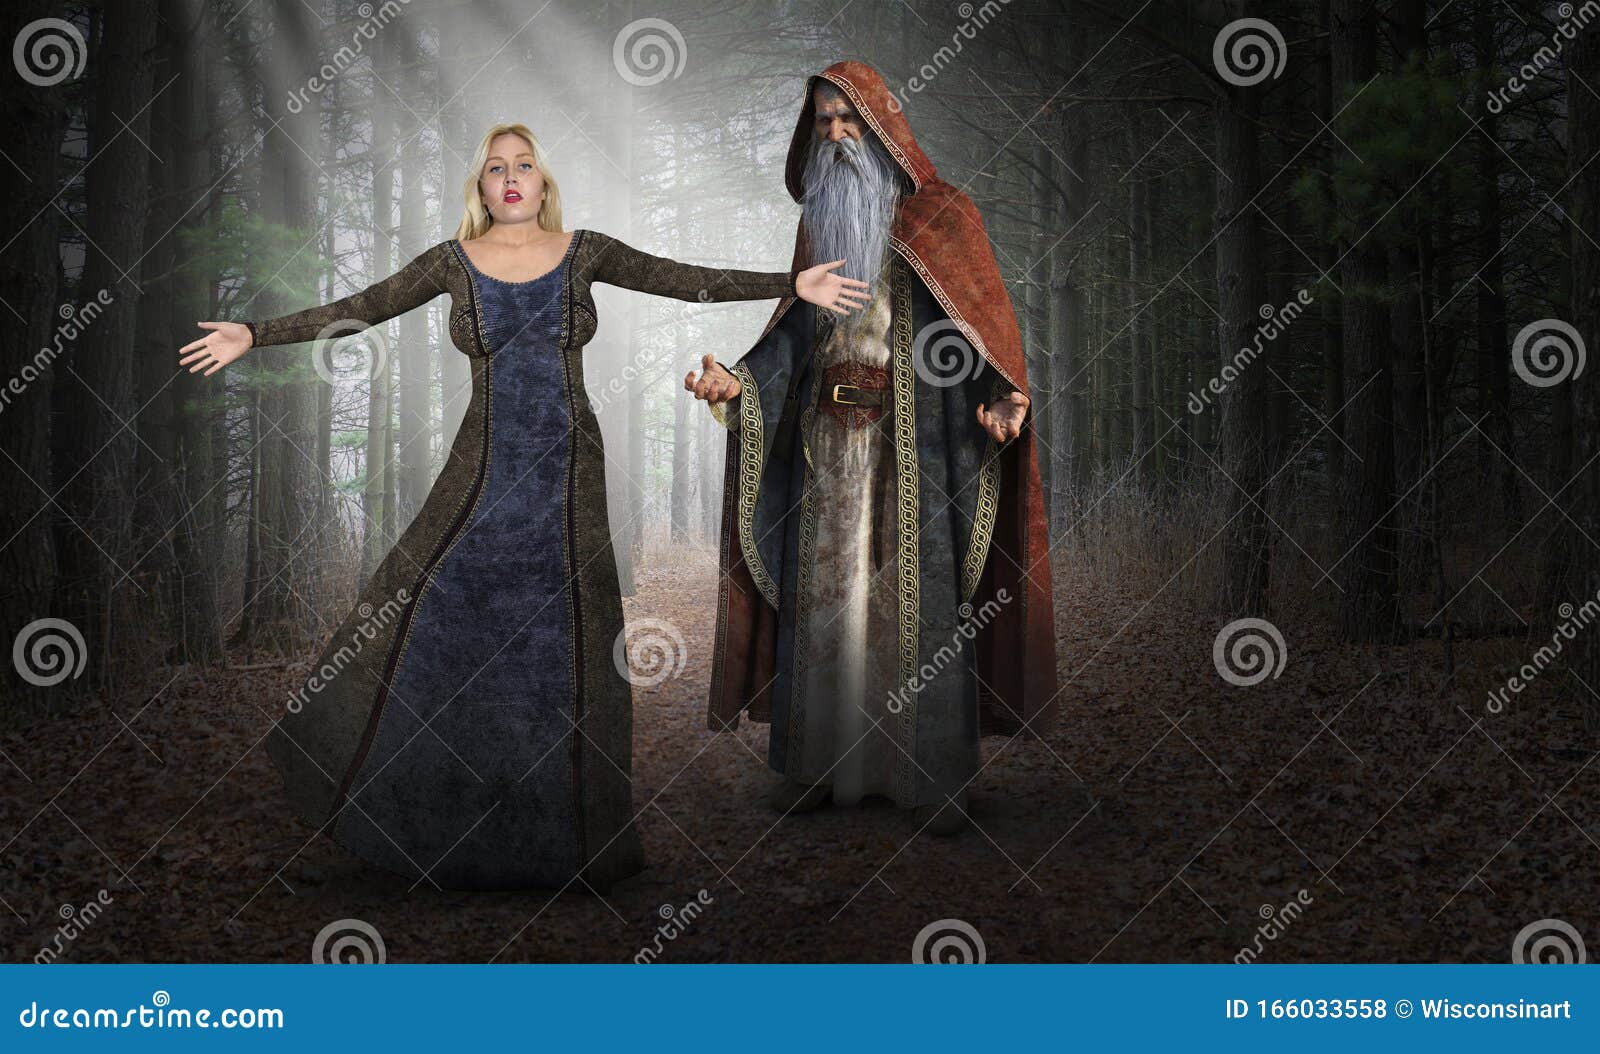 lugtfri at retfærdiggøre defile Wizard, Witch, Magic, Fantasy, Surreal, Nature Stock Photo - Image of  scene, dark: 166033558